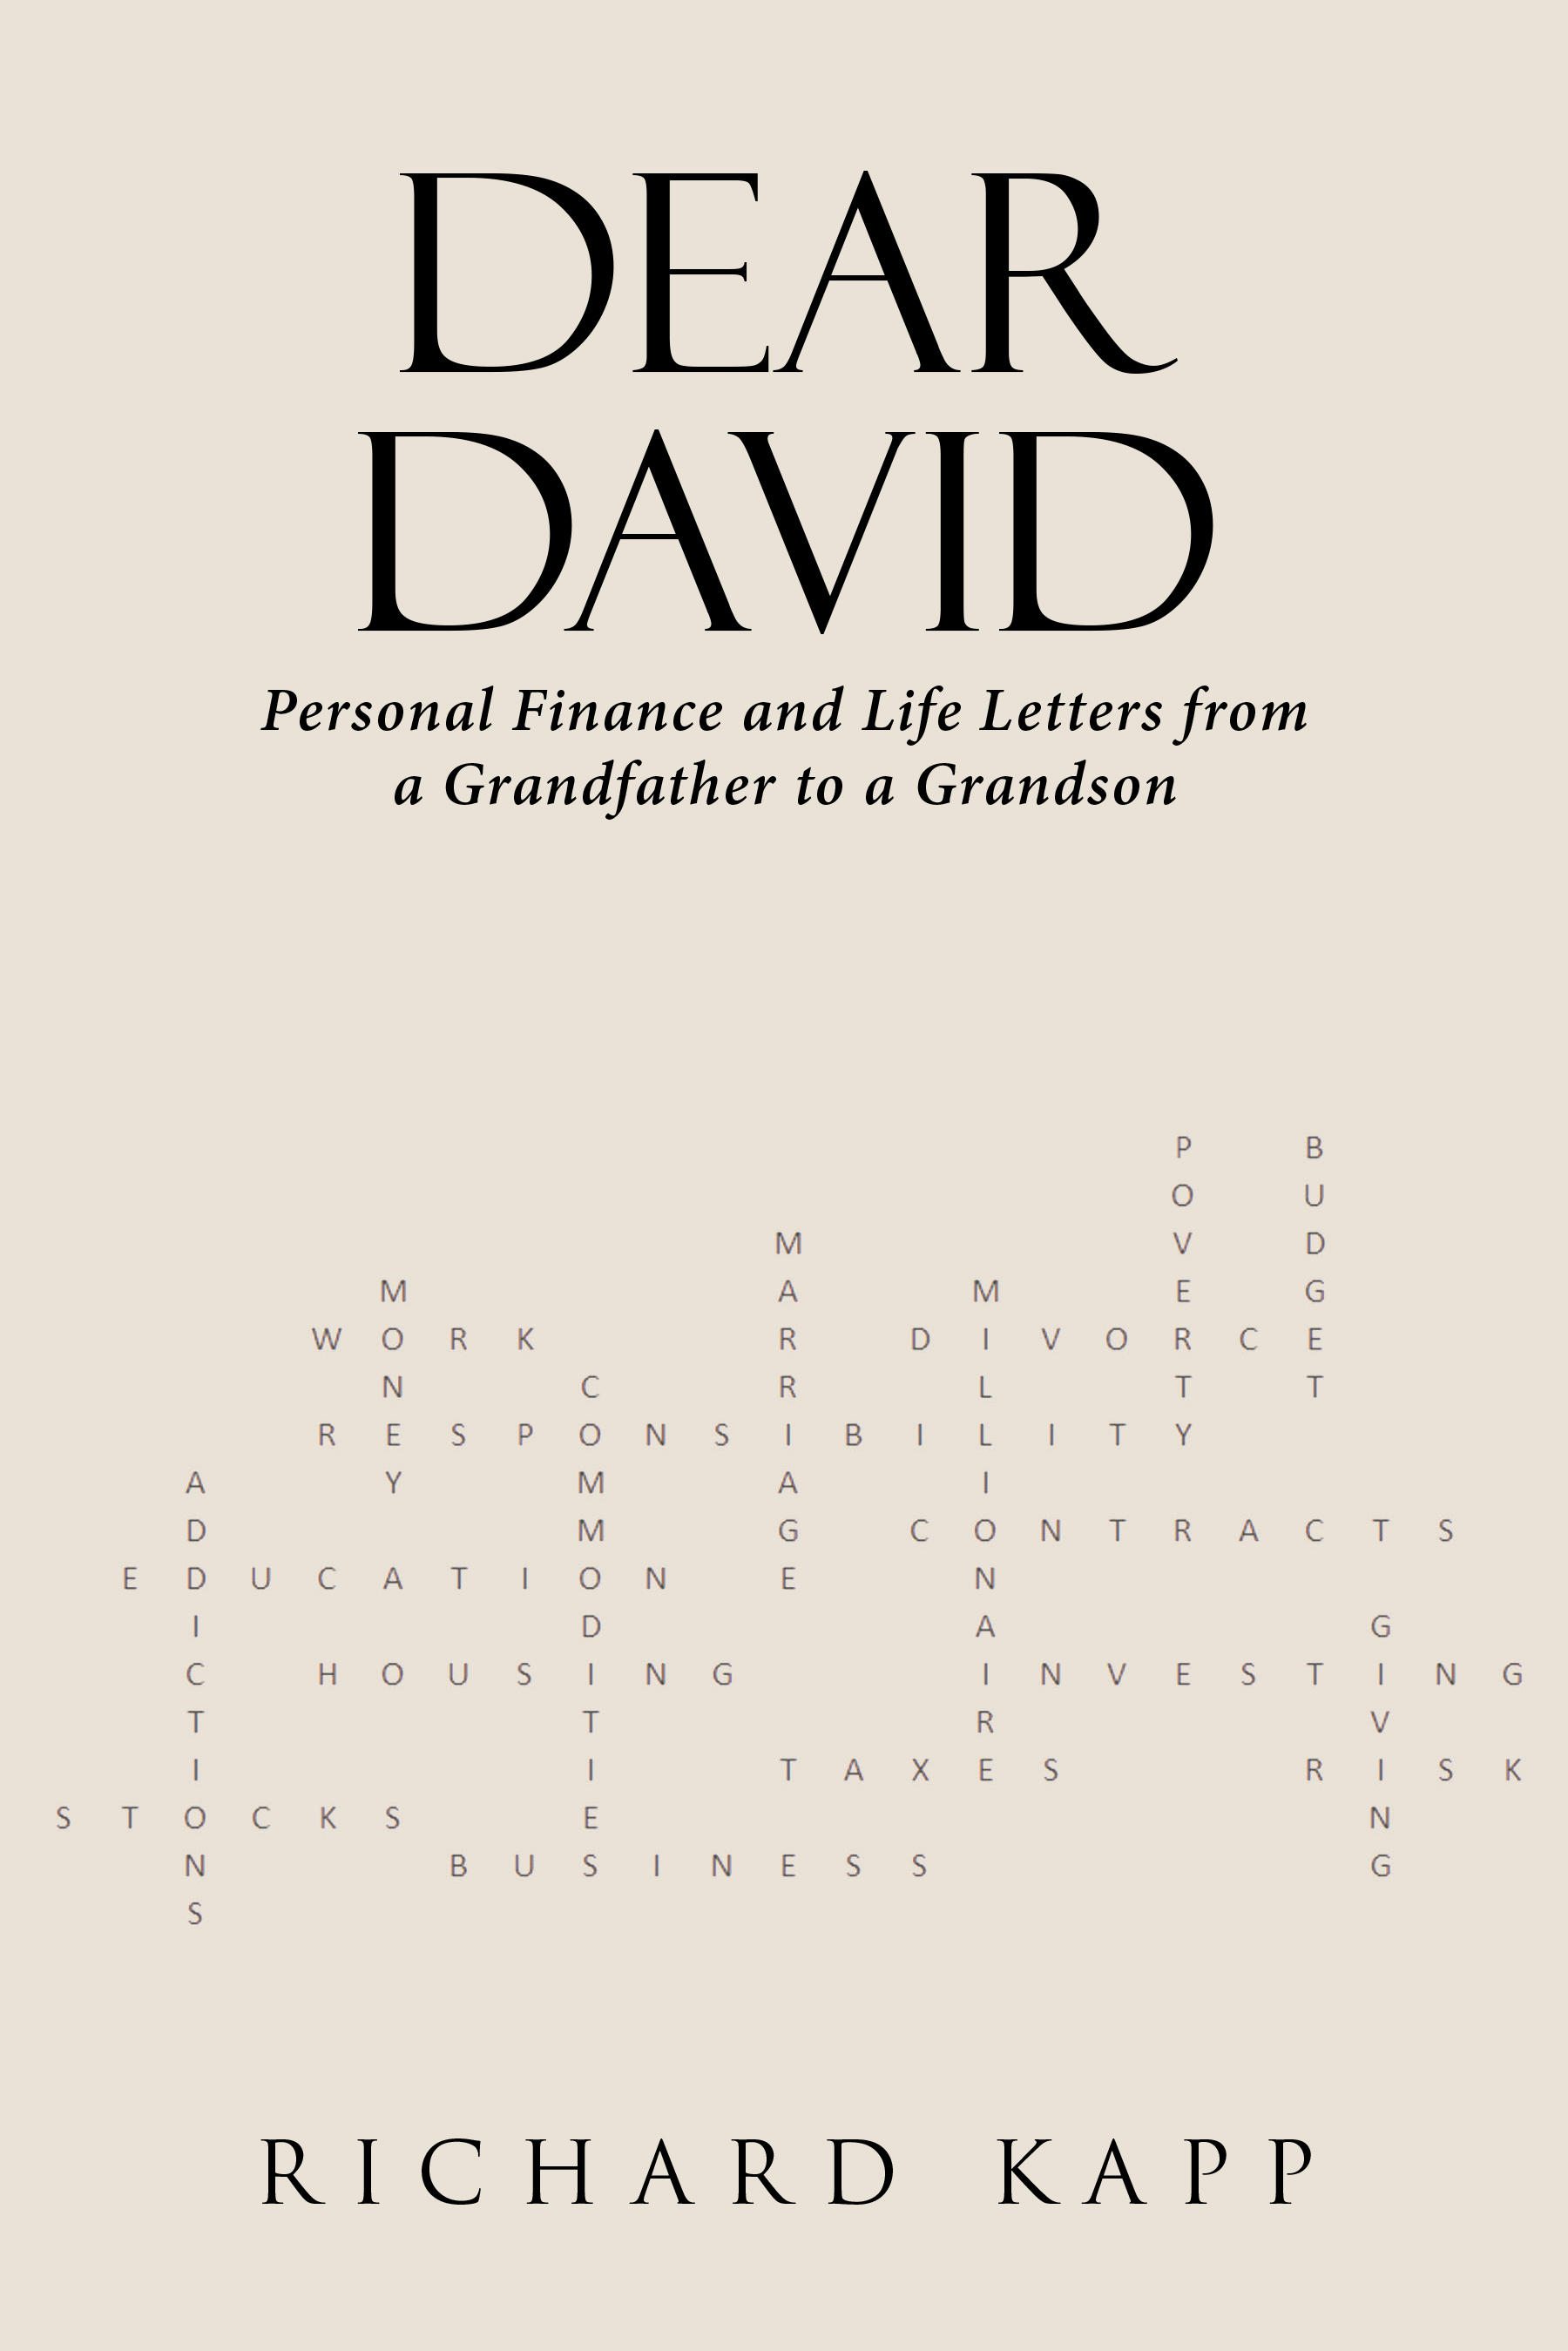 Author Richard Kapp’s New Book, "Dear David," is a Collection of Letters Holding Valuable Life Lessons That Have Been Passed Down from the Author to His Grandson